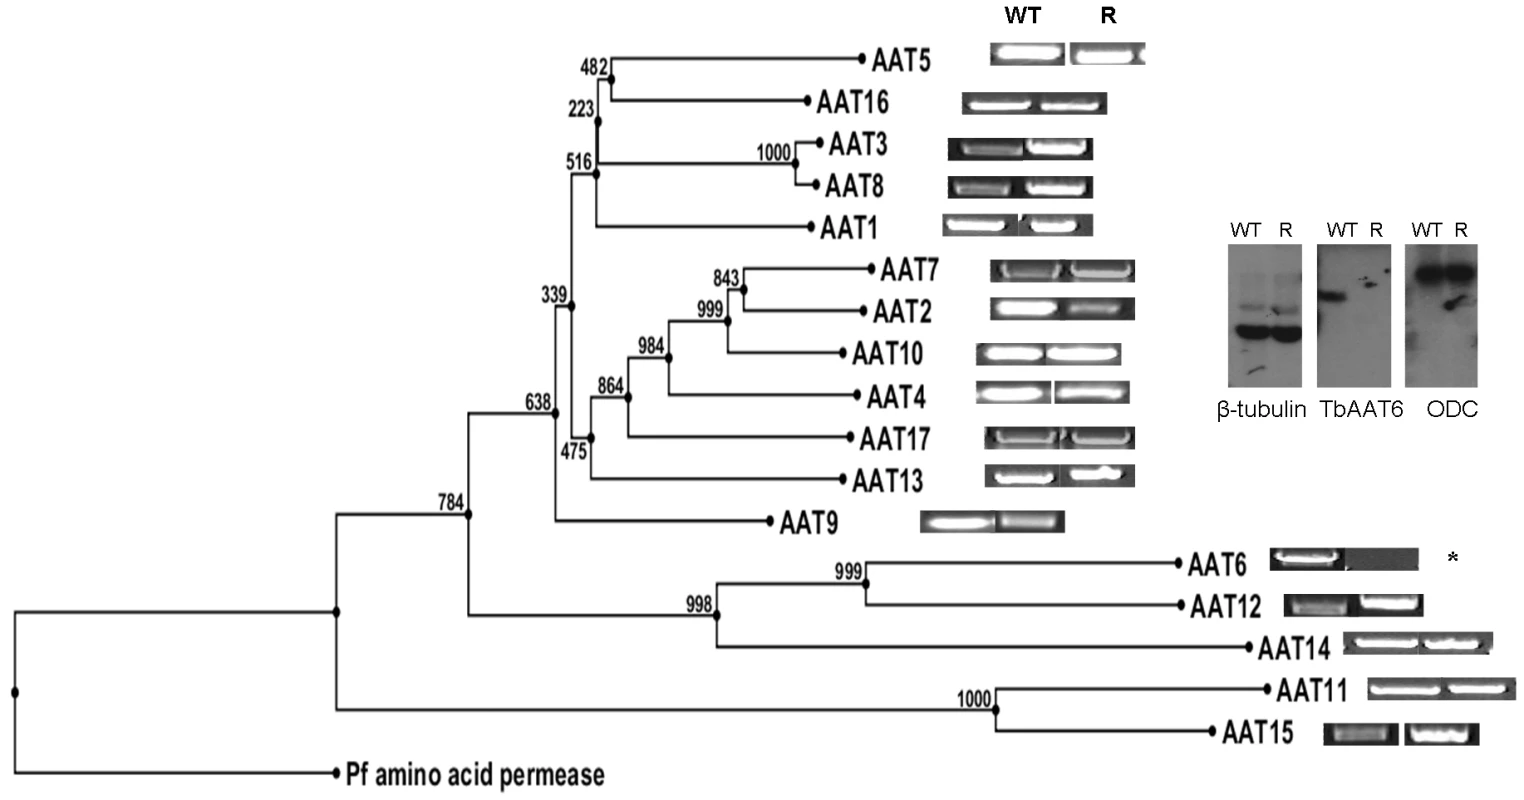 Cladogram of the amino acid transporters predicted to be in <i>T. brucei</i> and how amplification of wildtype and resistant cell PCR products of 17 amino acid transporters from the wildtype and resistant cell lines shows <i>TbAAT6</i> to be absent.